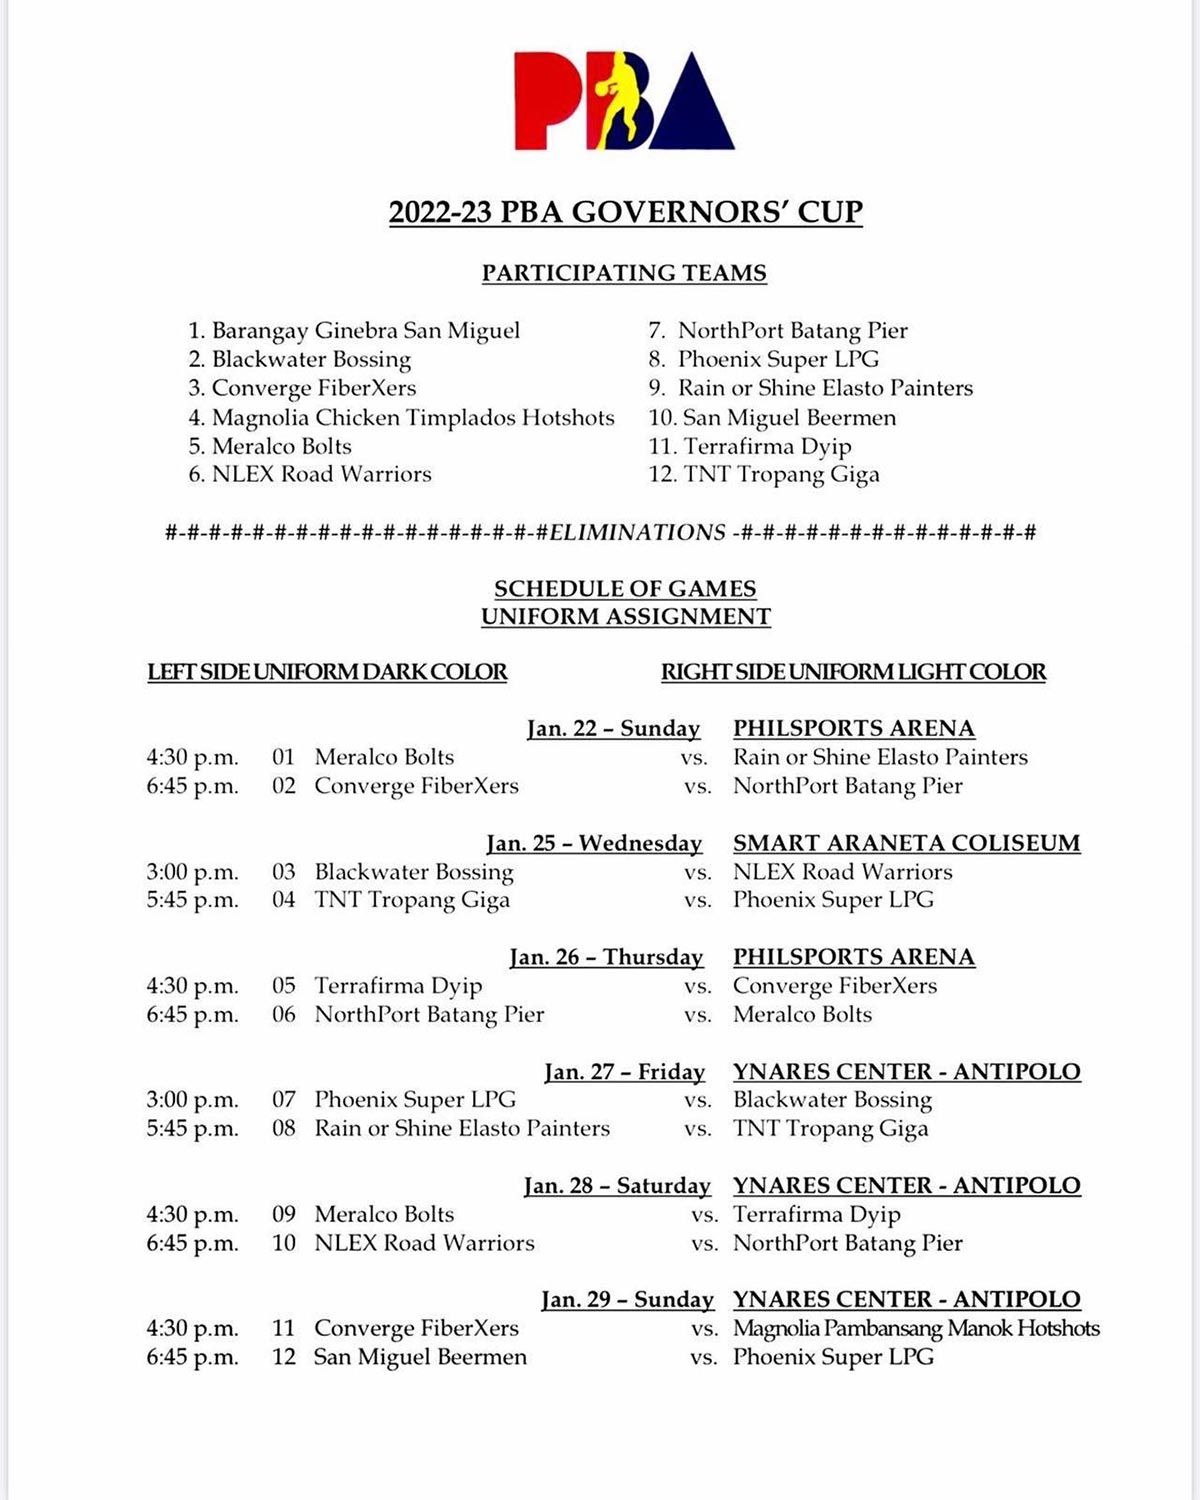 PBA Governors' Cup